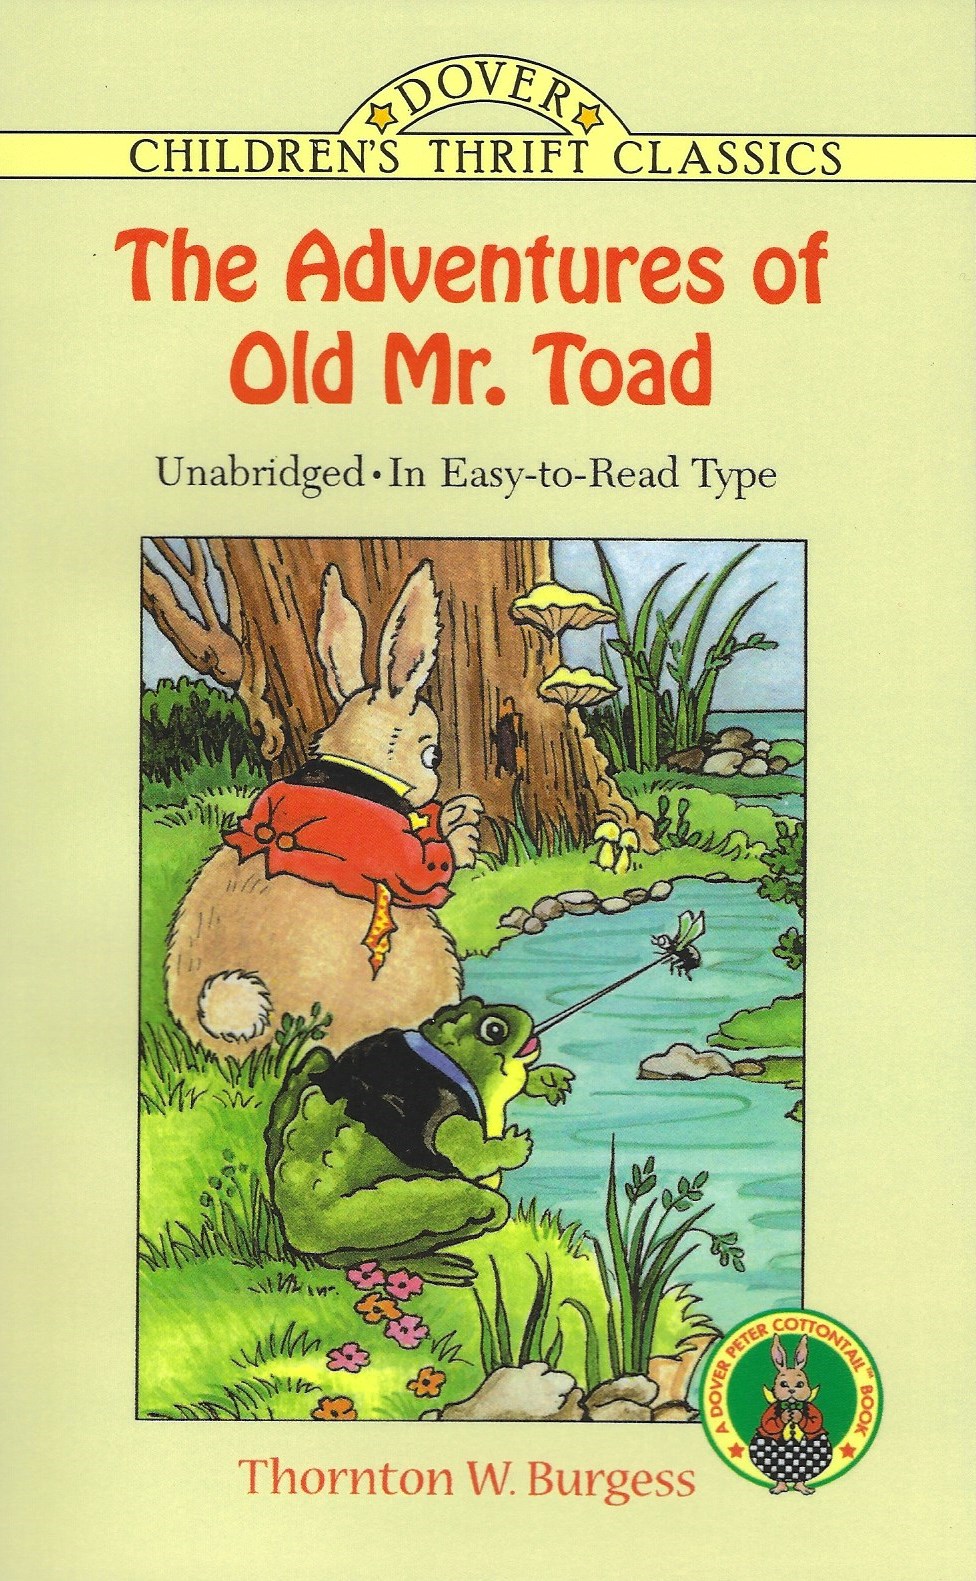 THE ADVENTURES OF OLD MR. TOAD Thornton W. Burgess